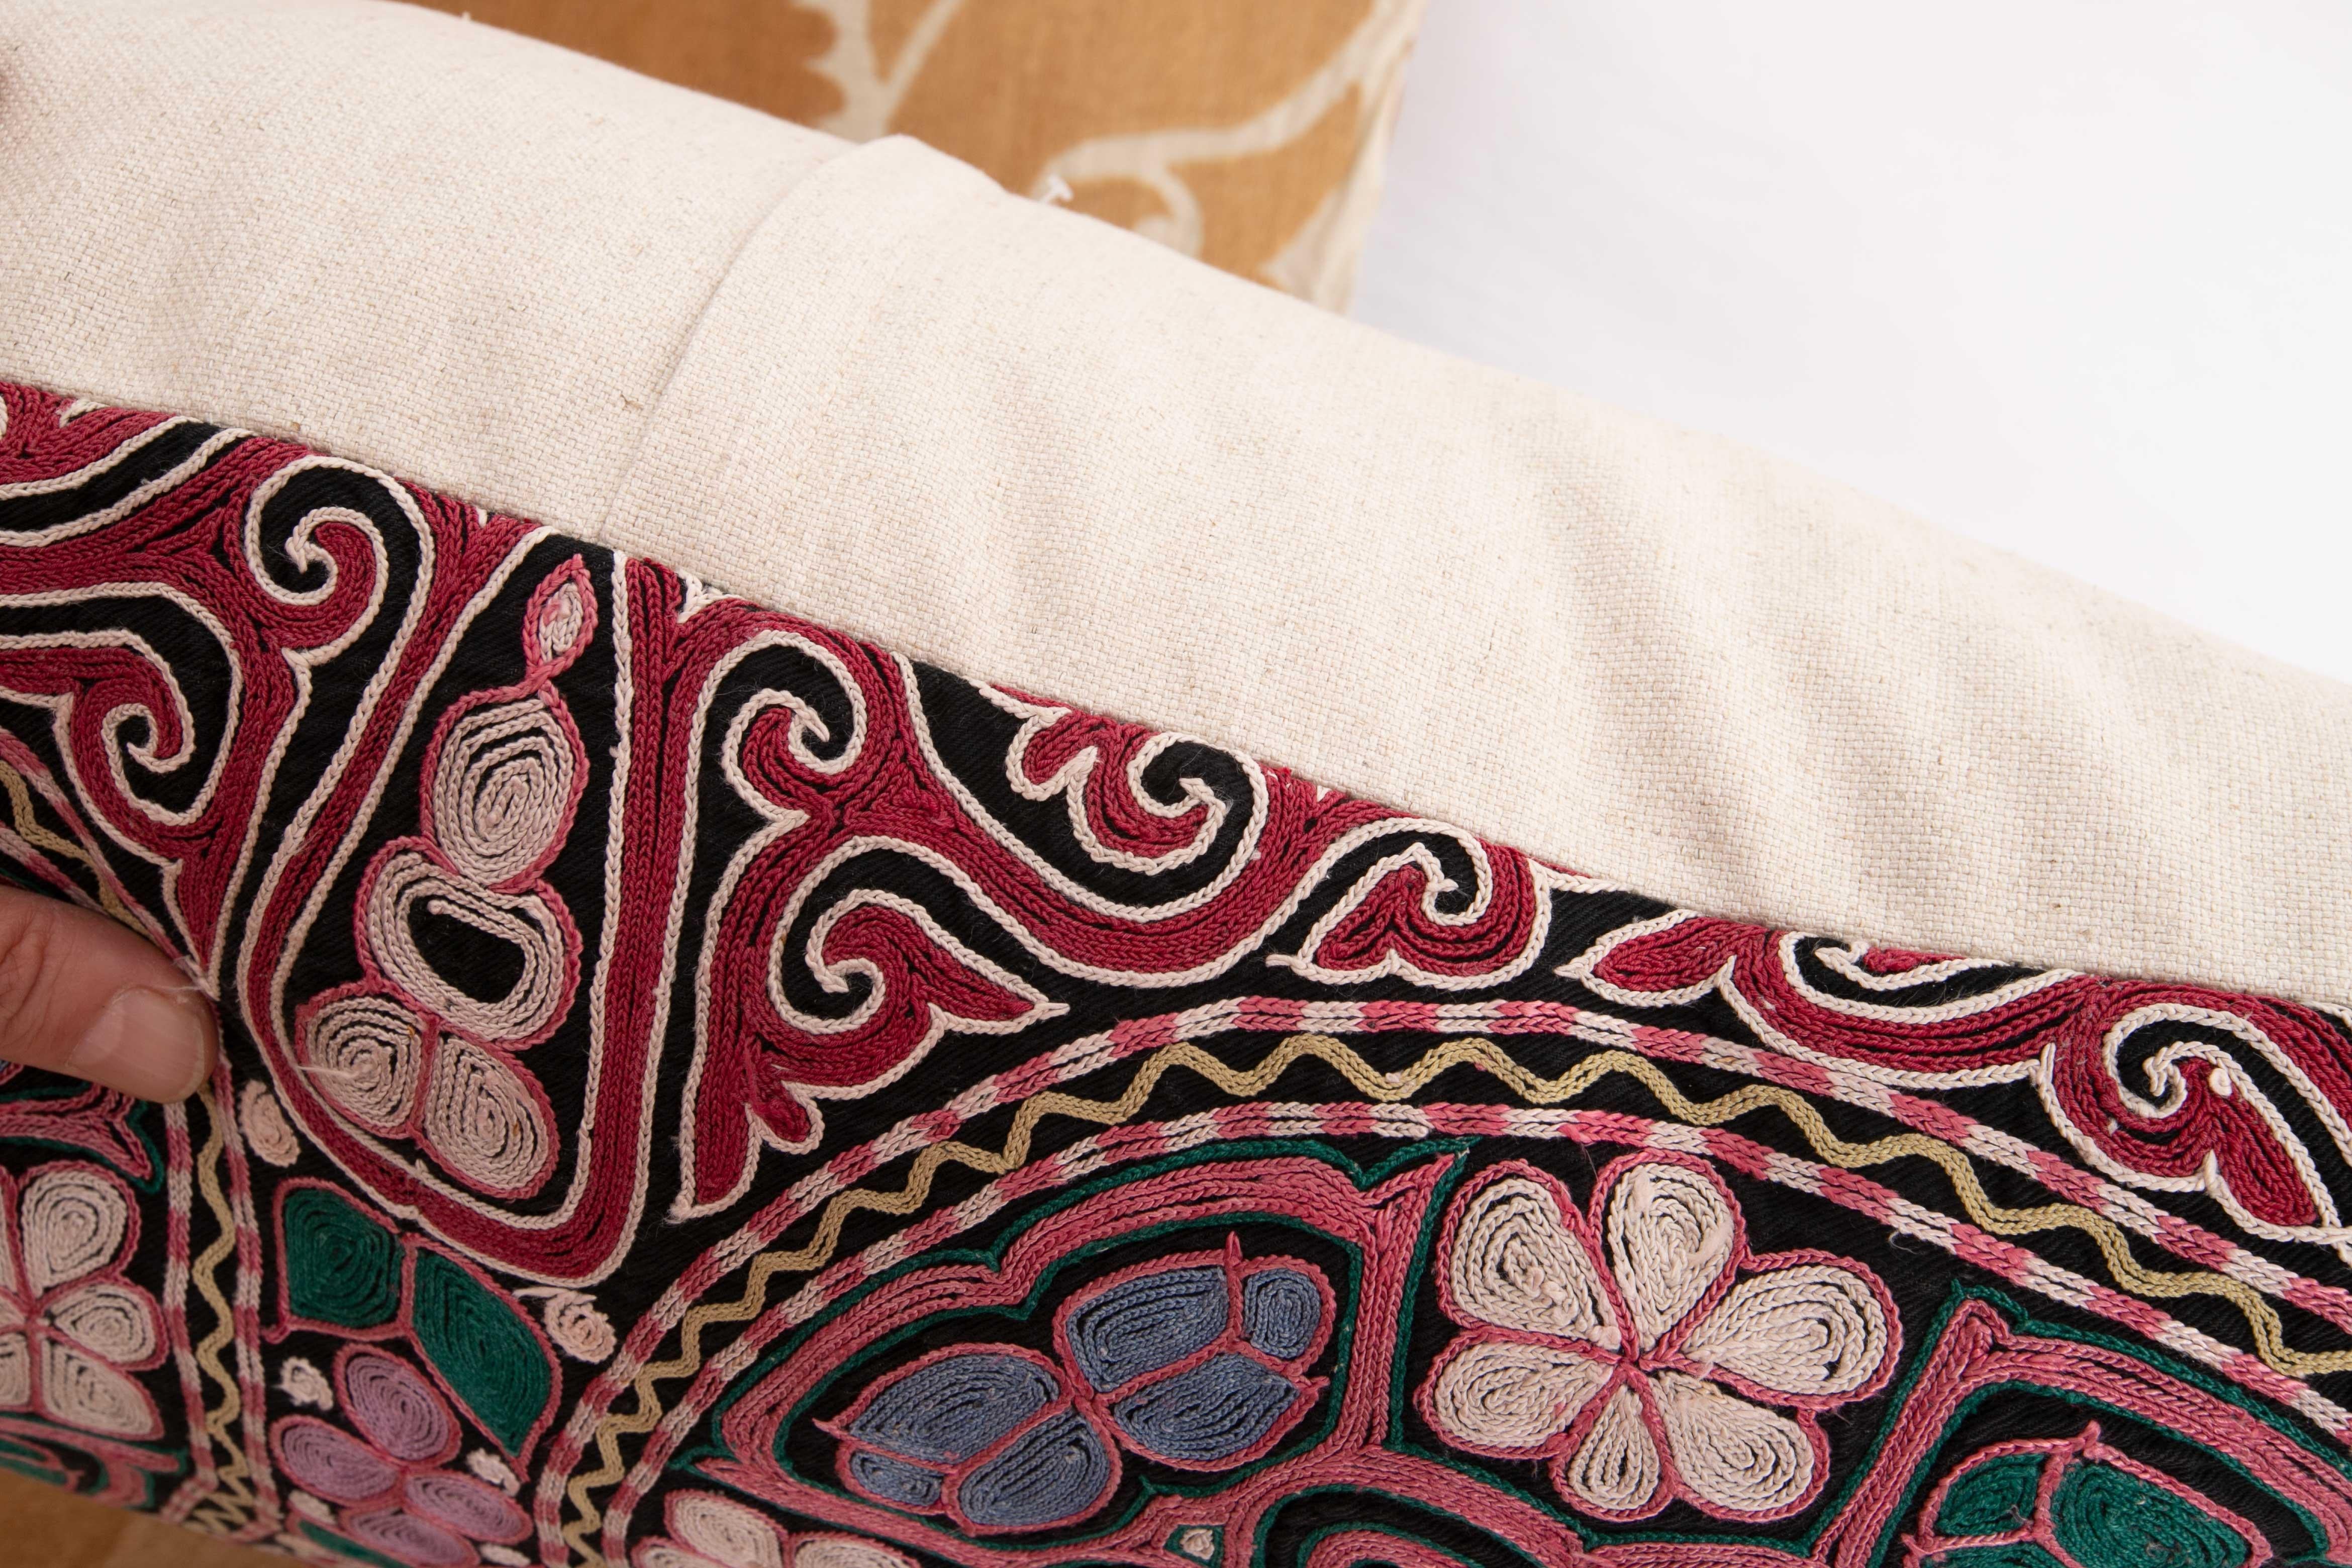 Pillowcase made from a mid 20th. C. Kazakh / Kyrgyz Embroidery For Sale 2